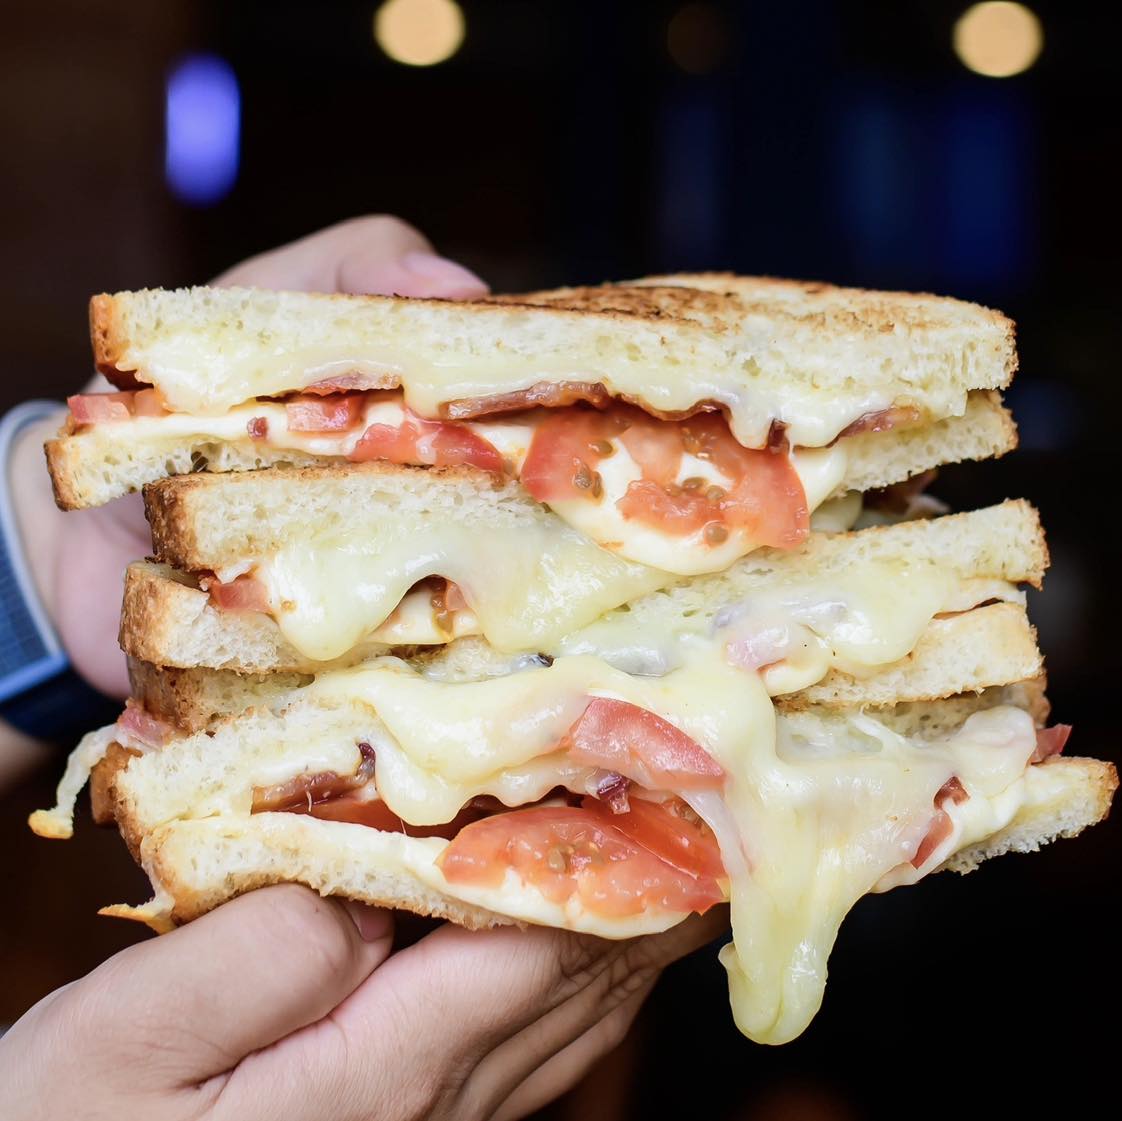 Hands holding a diagonally cut sandwich with melted cheese